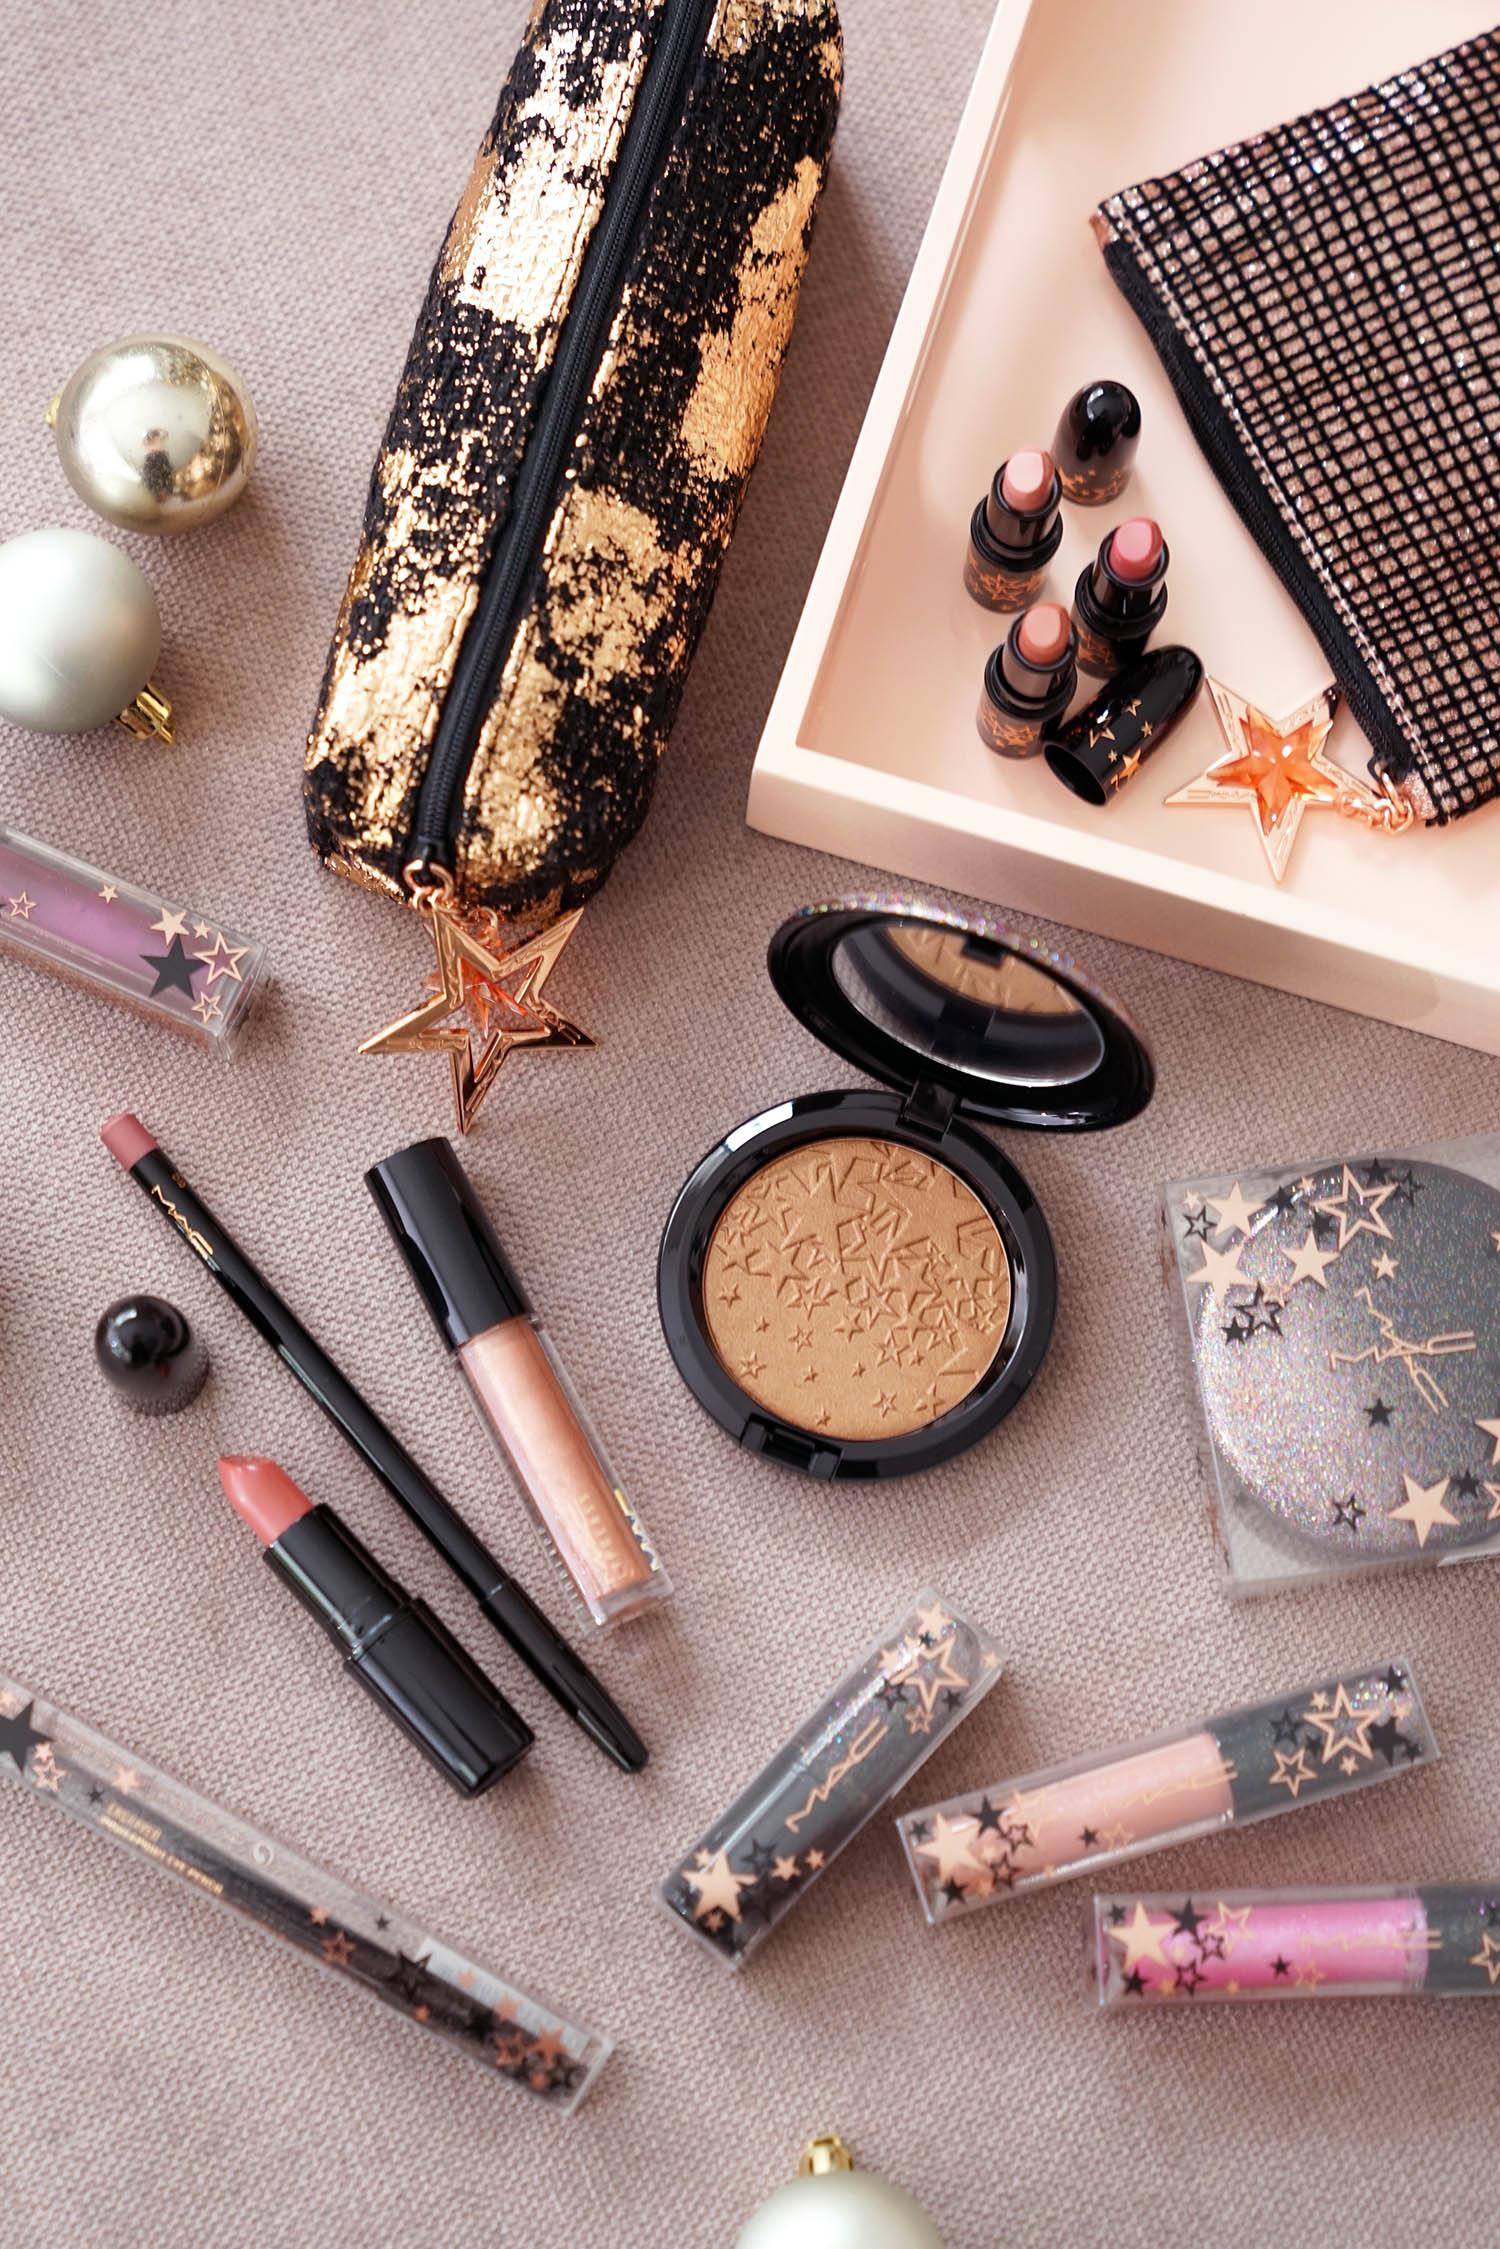 Holiday Gift Ideas: $50 and Under - The Beauty Look Book